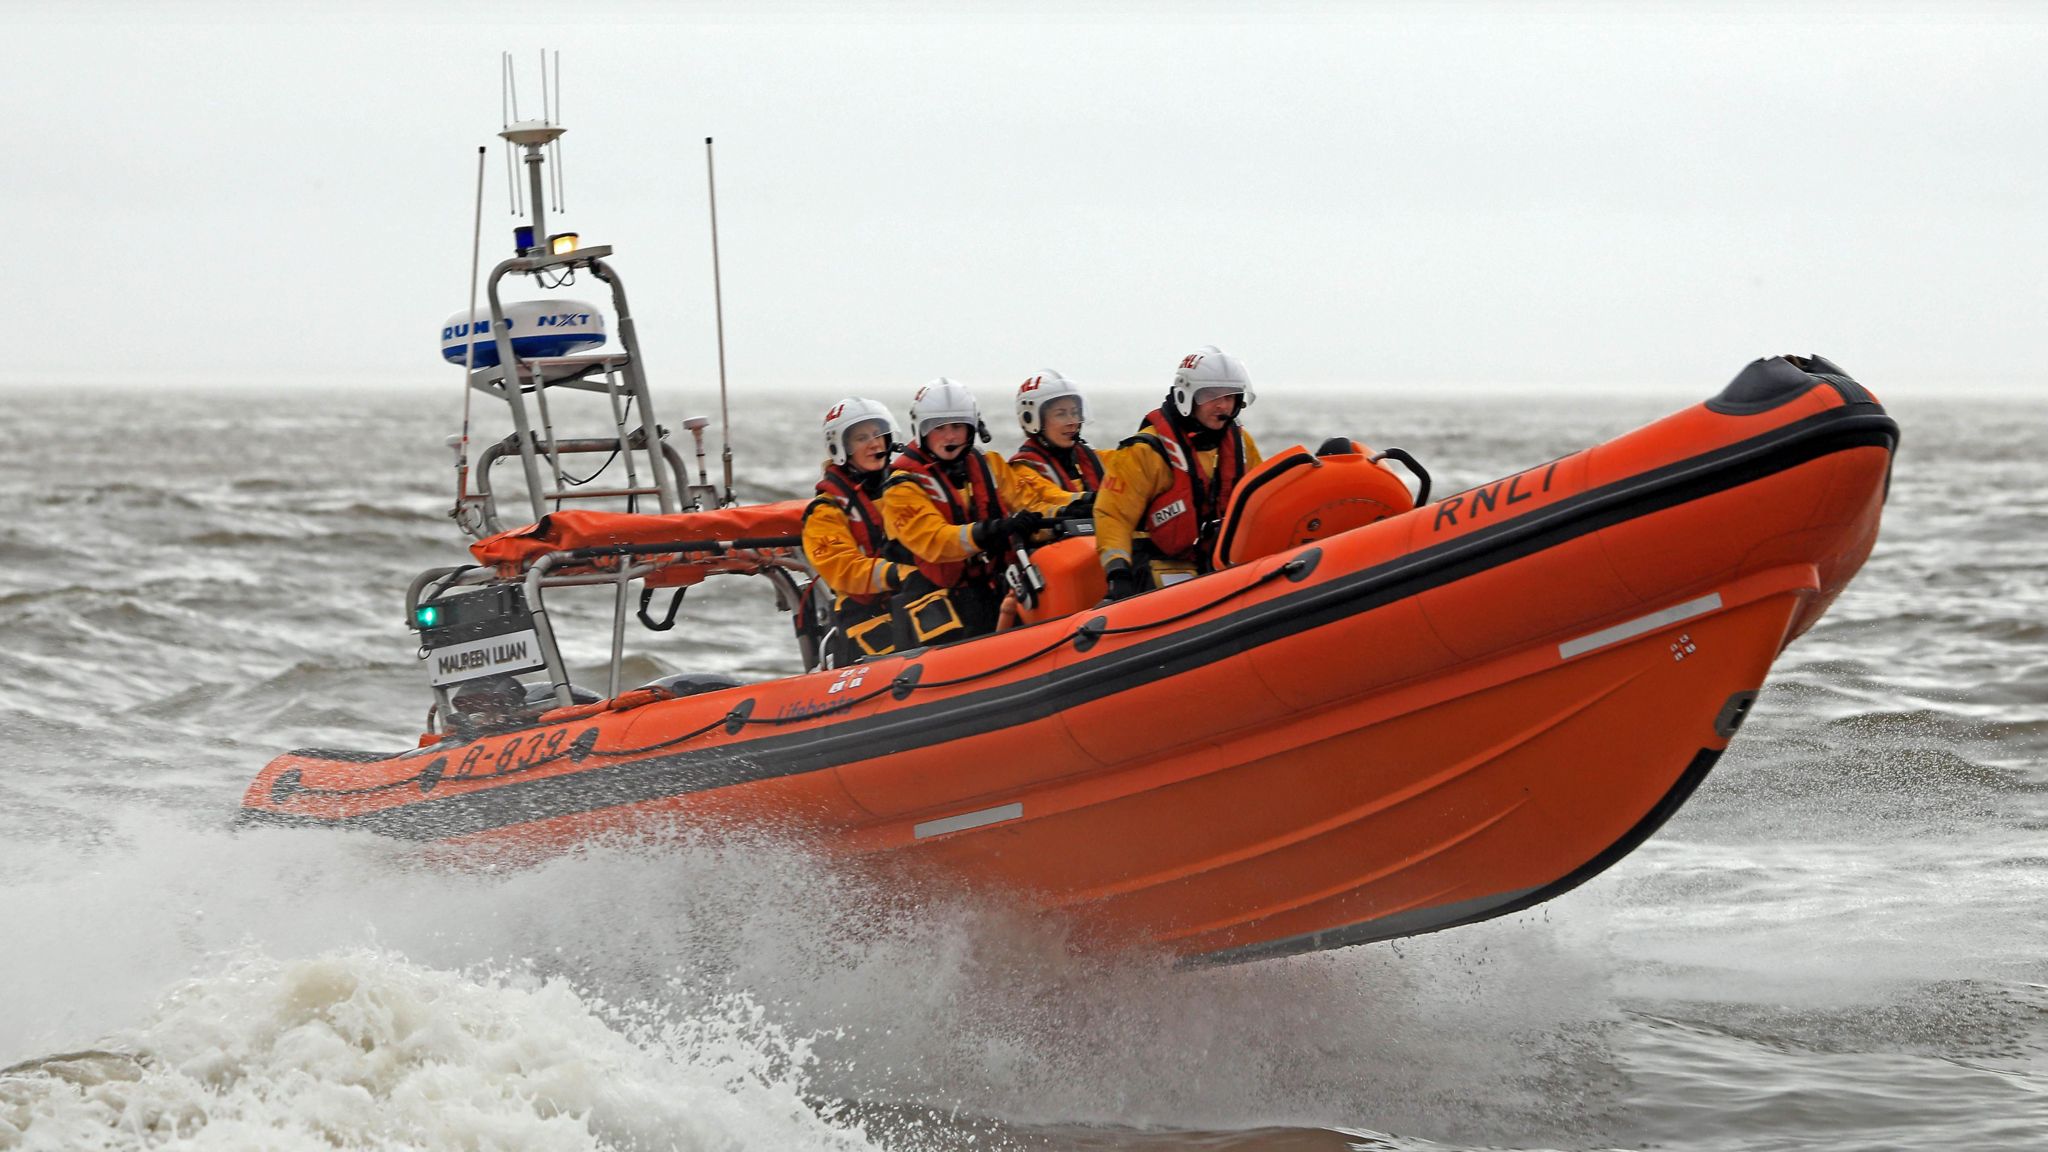 Penarth Lifeboat on a call out